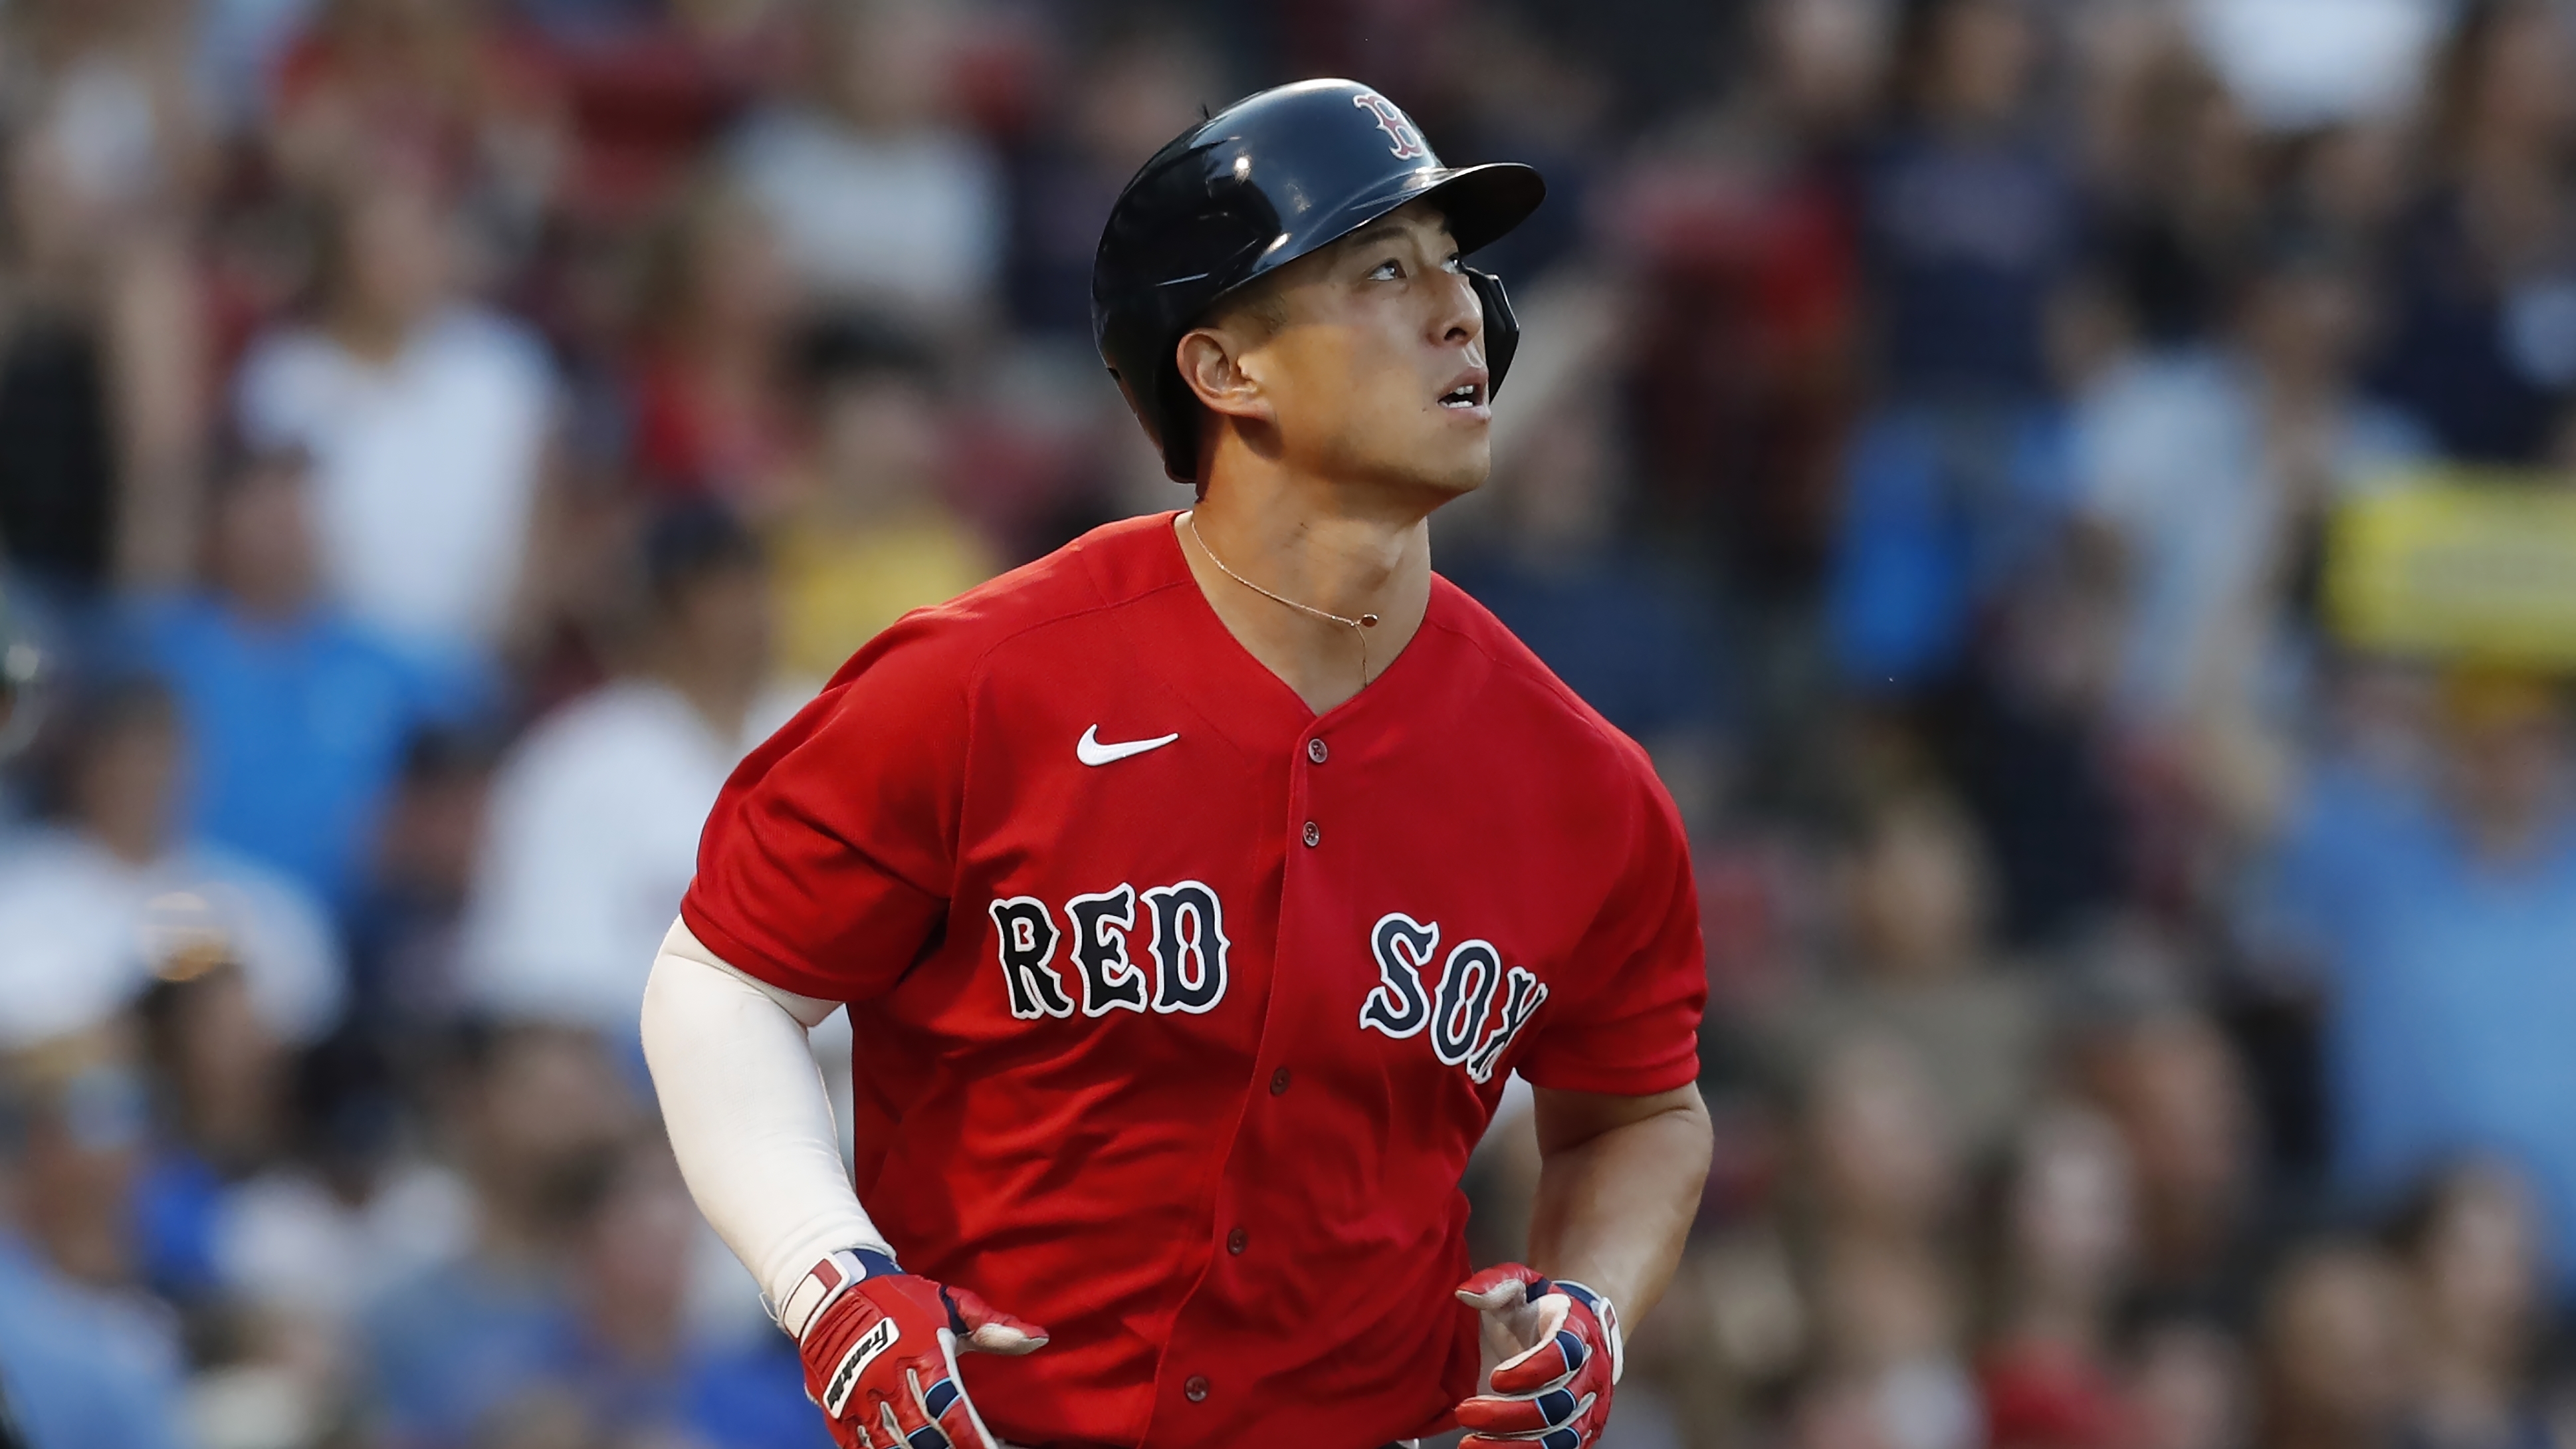 Magellan Jets joins Boston Red Sox roster